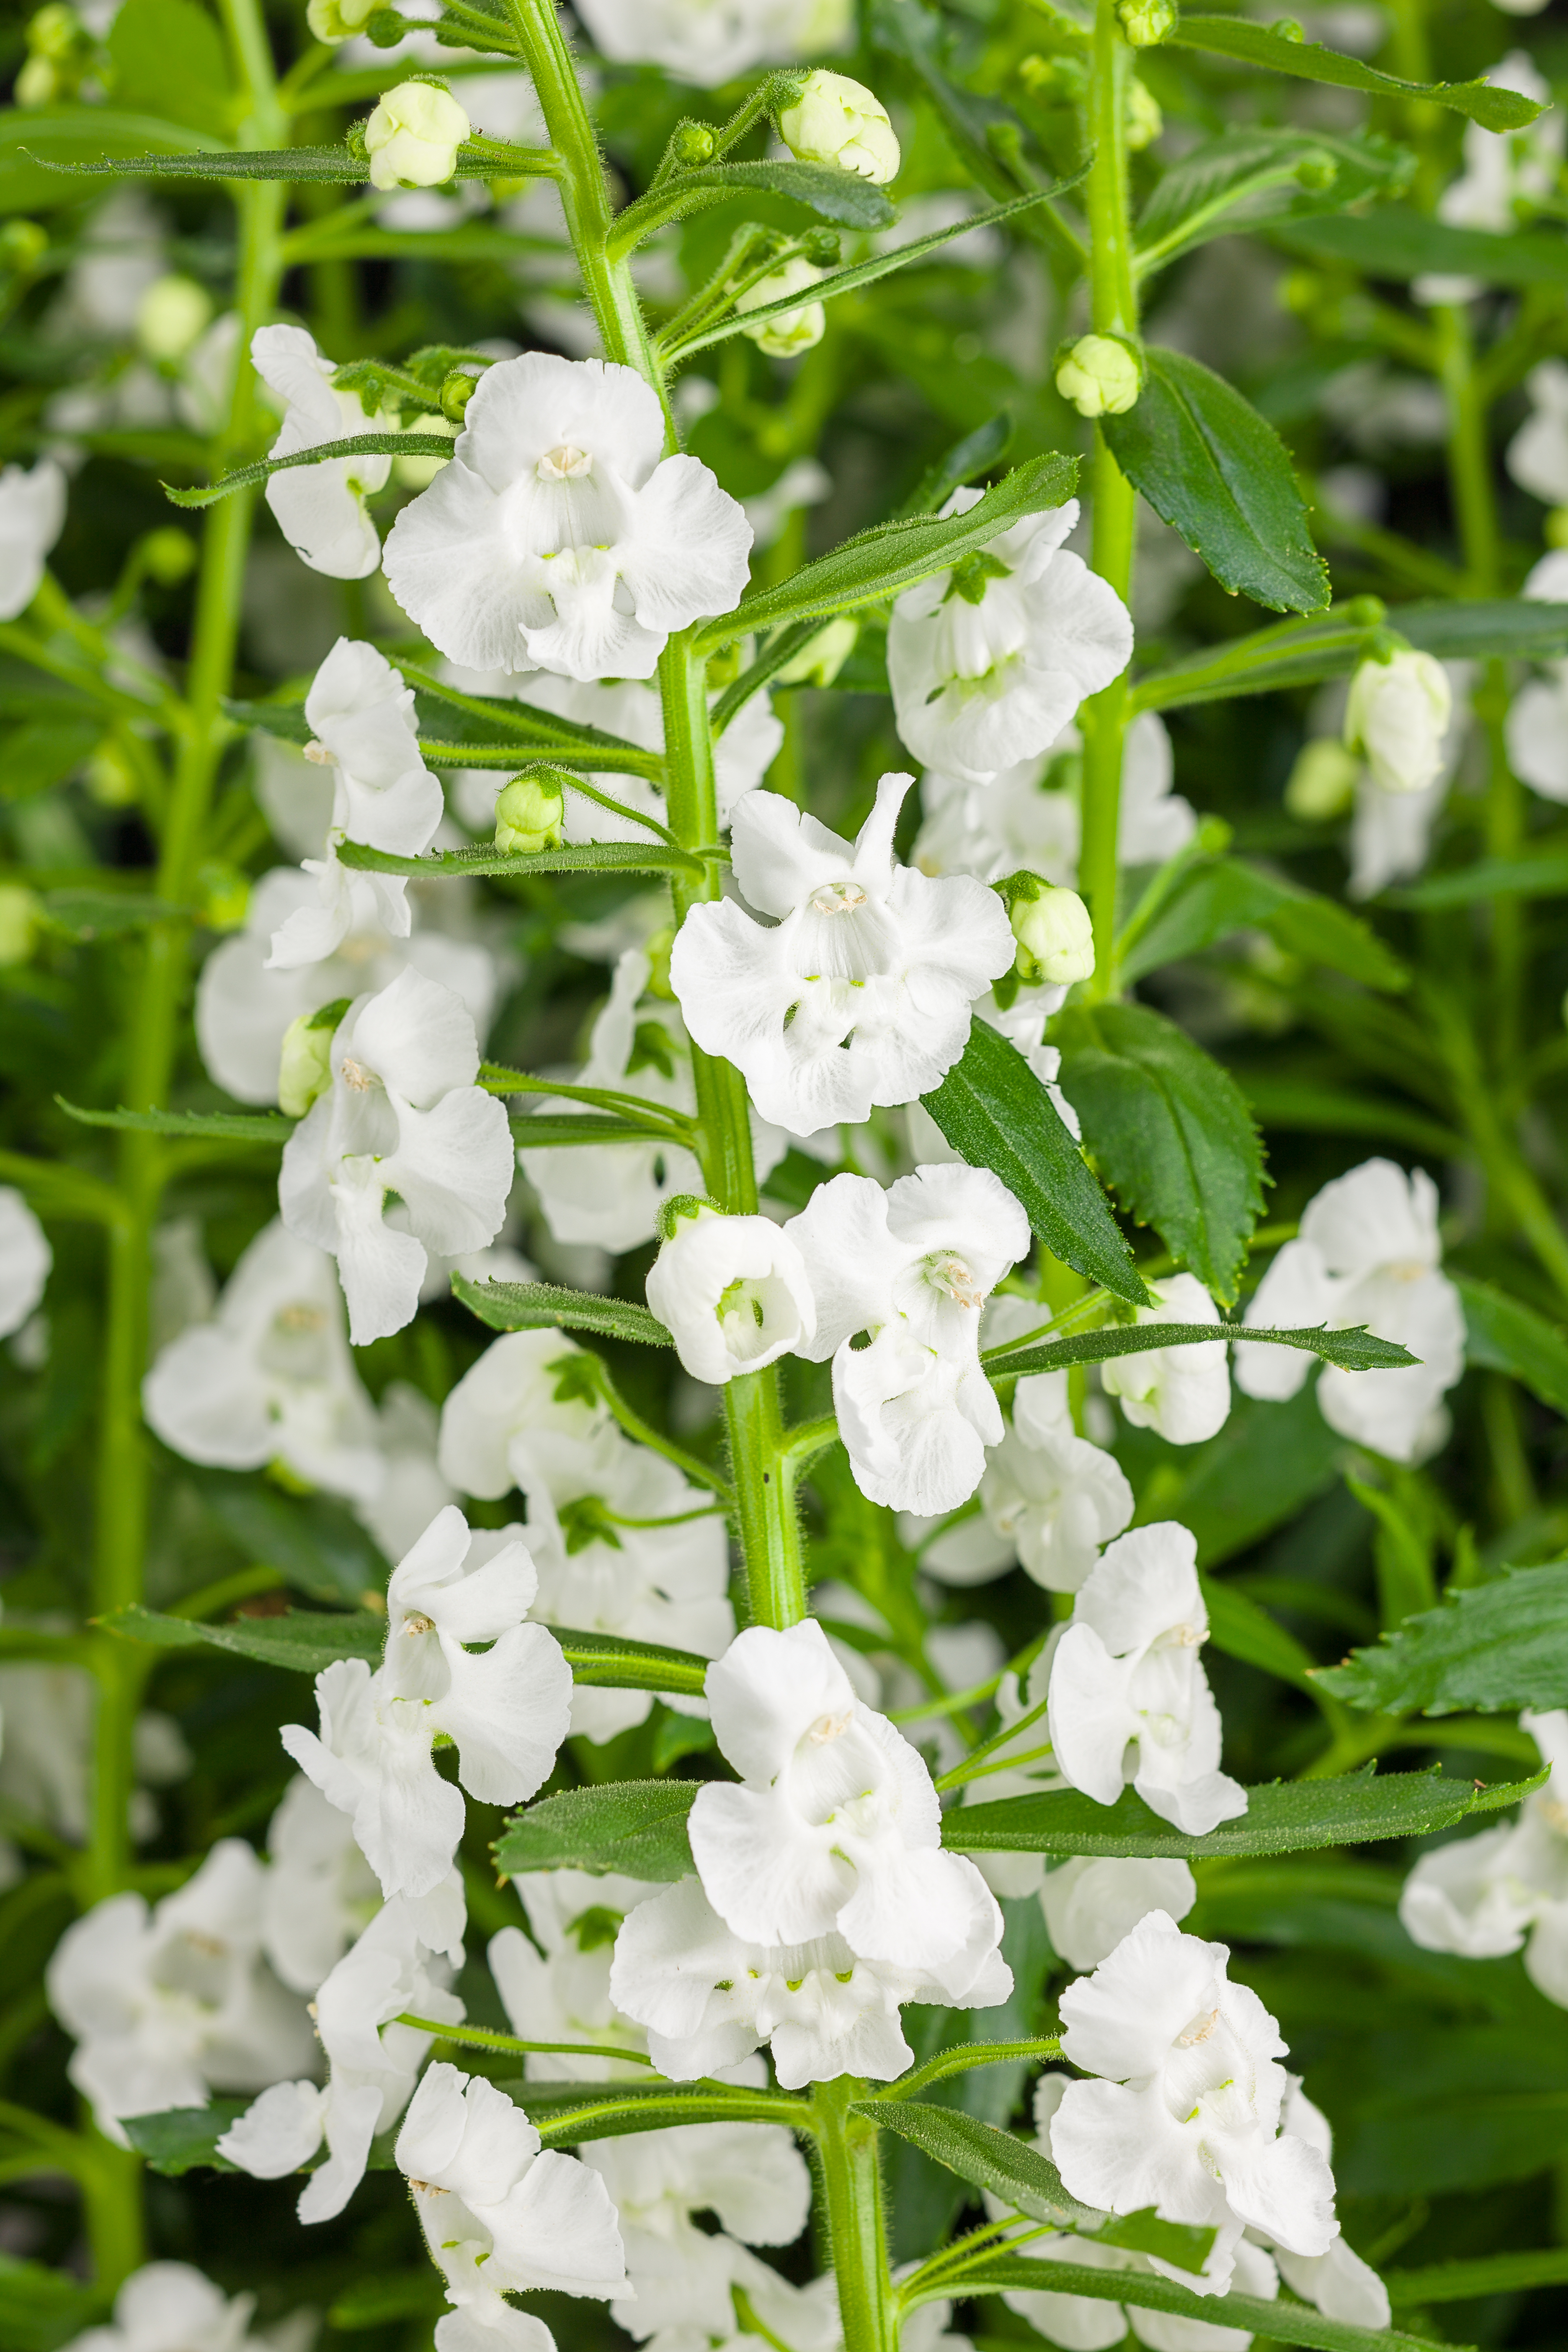 Image of Angelface Super White Angelonia flower